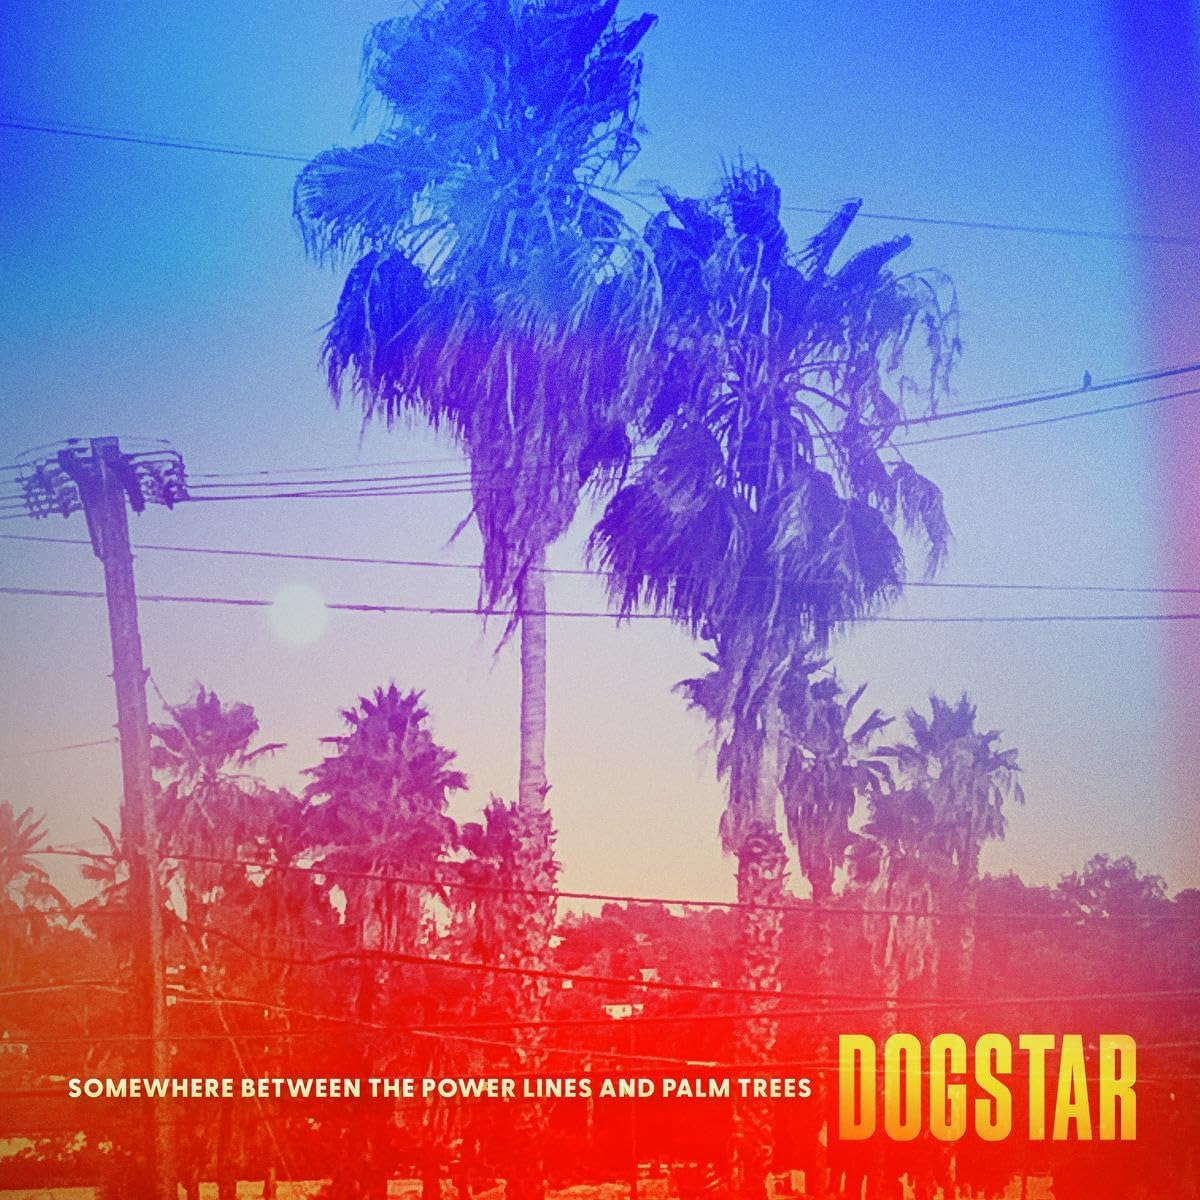 Рок Warner Music Dogstar - Somewhere Between The Power Lines and Palm Trees (Black Vinyl LP) 100mm arcade push button led microswitch music game illuminated 12v power pressing hitting button switch rhythm machine